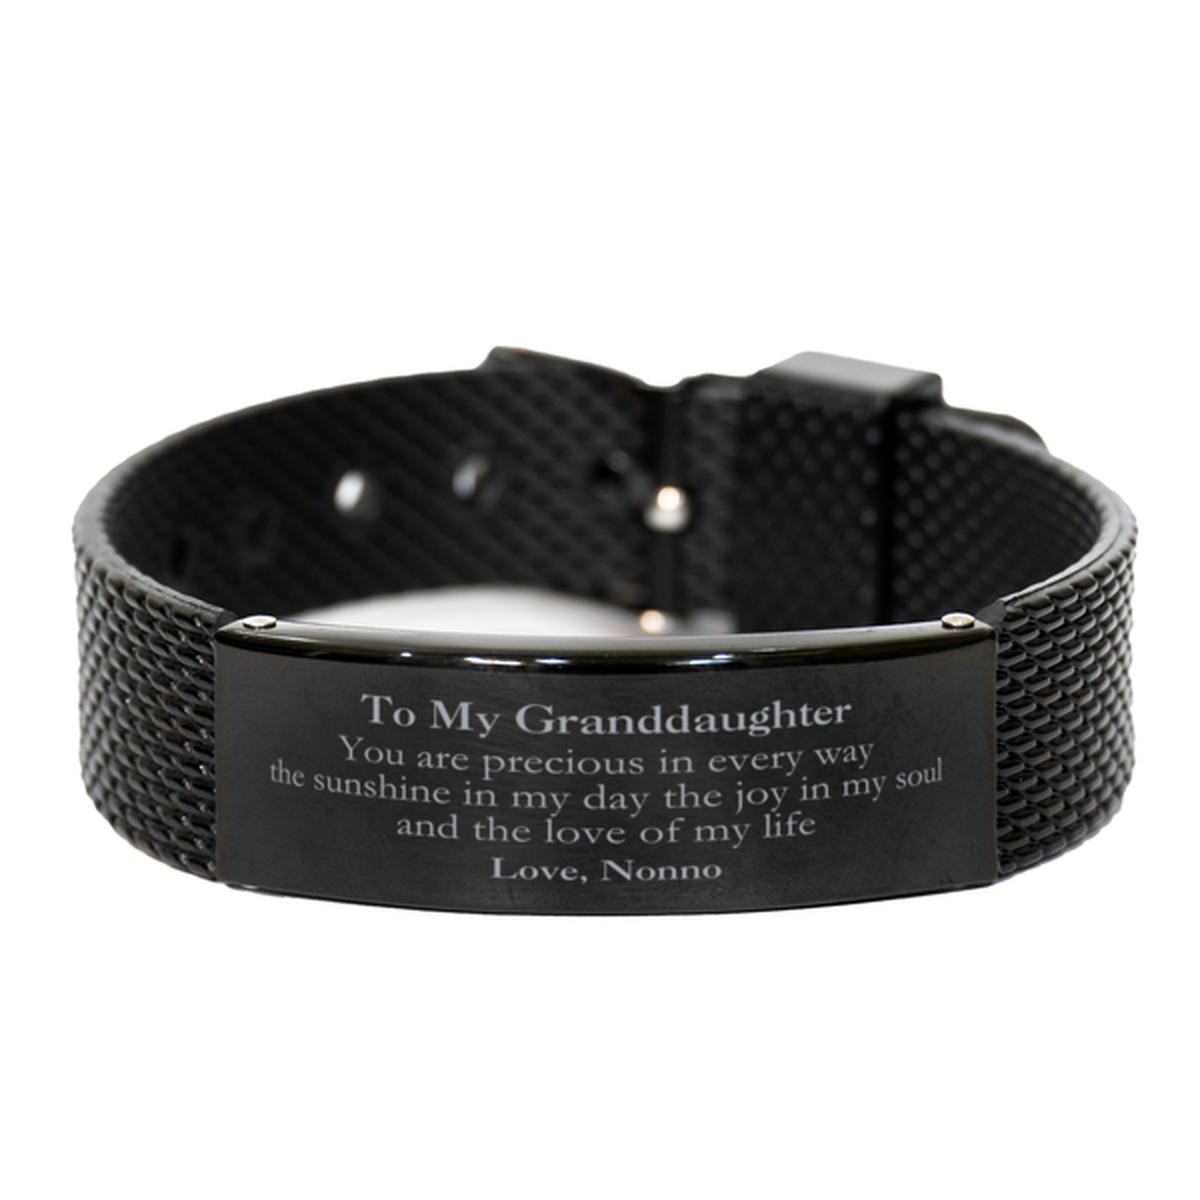 Graduation Gifts for Granddaughter Black Shark Mesh Bracelet Present from Nonno, Christmas Granddaughter Birthday Gifts Granddaughter You are precious in every way the sunshine in my day. Love, Nonno